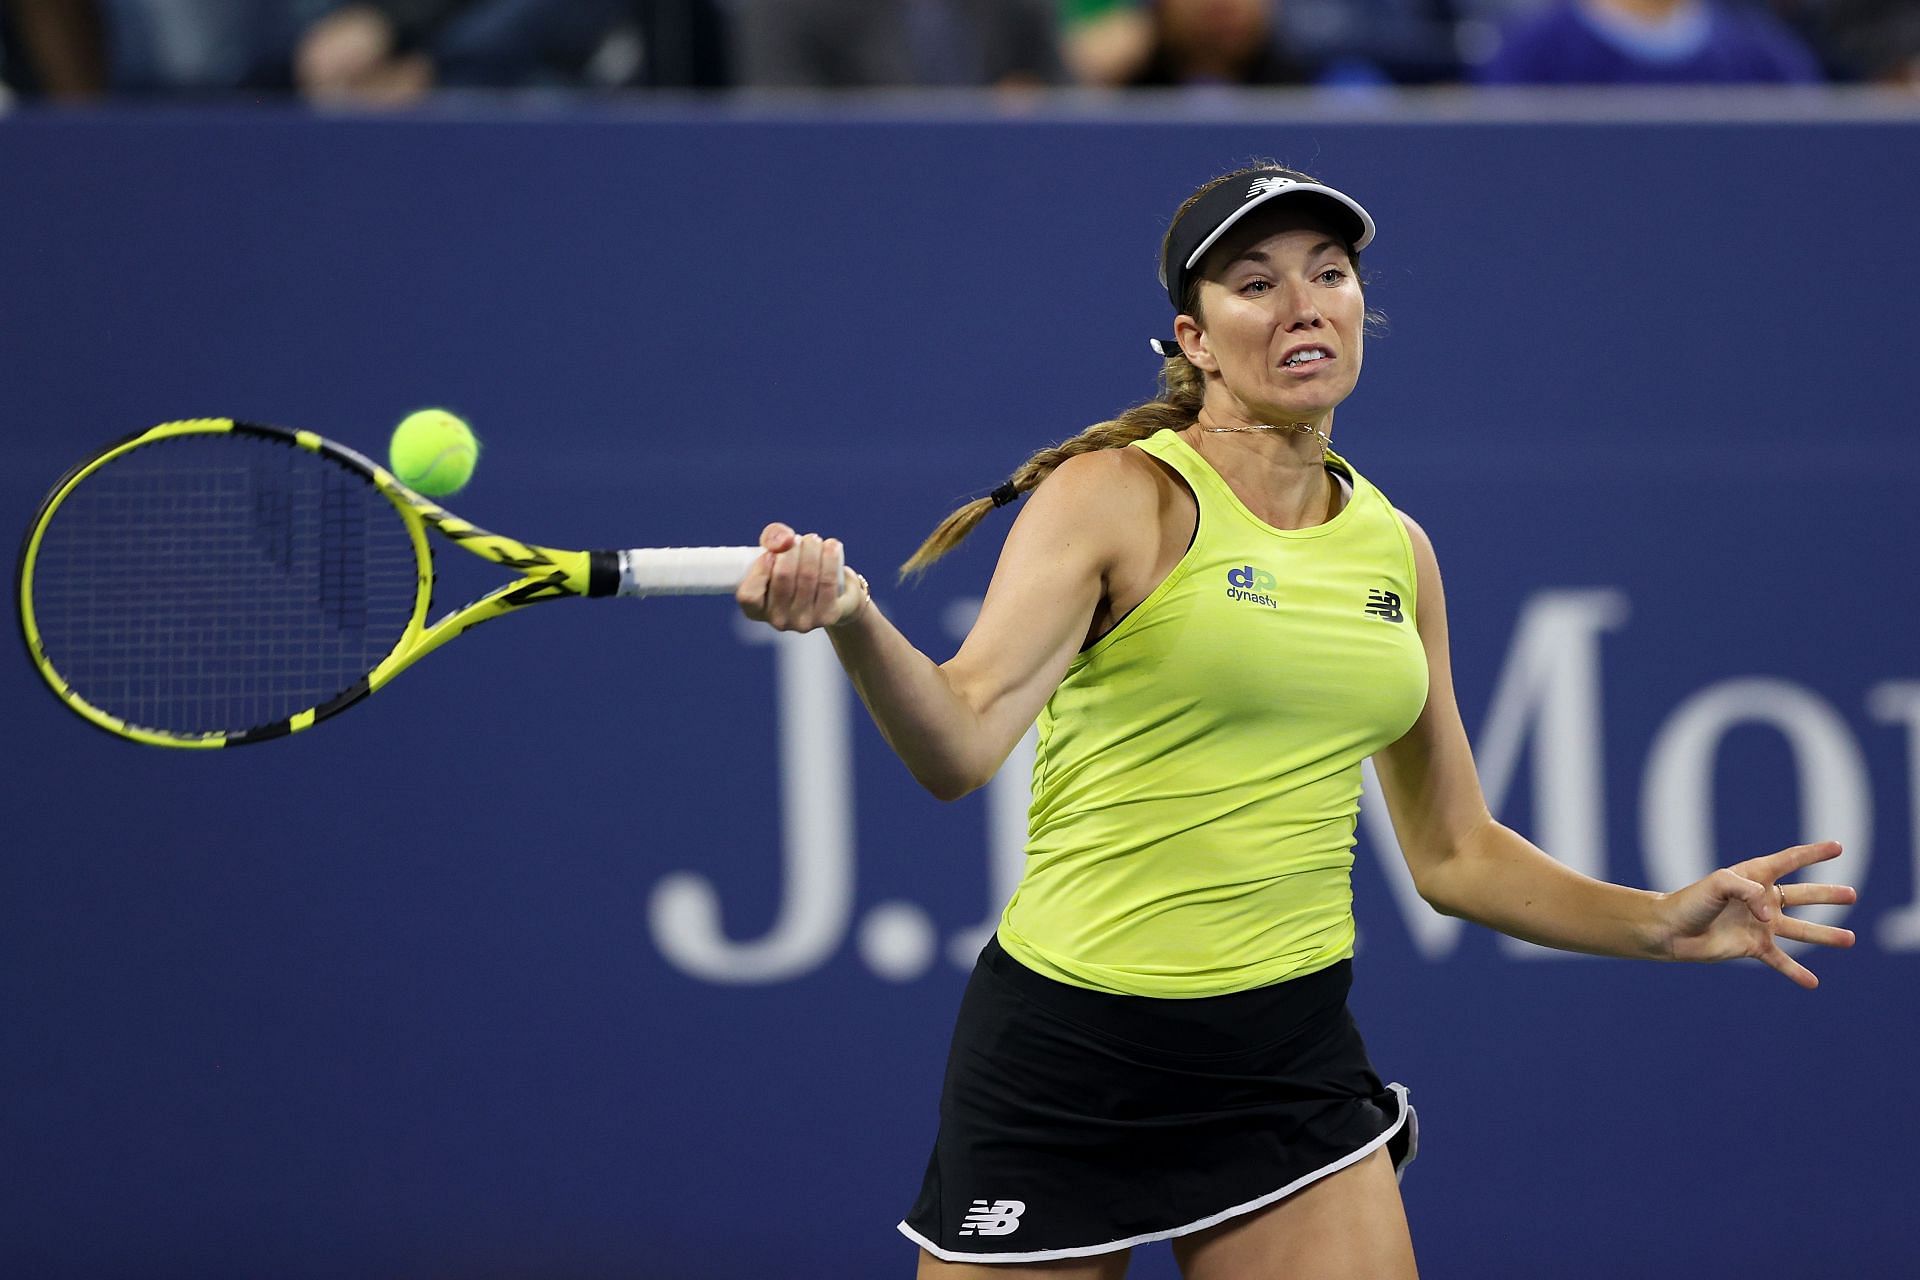 Danielle Collins strikes a forehand at the 2021 US Open